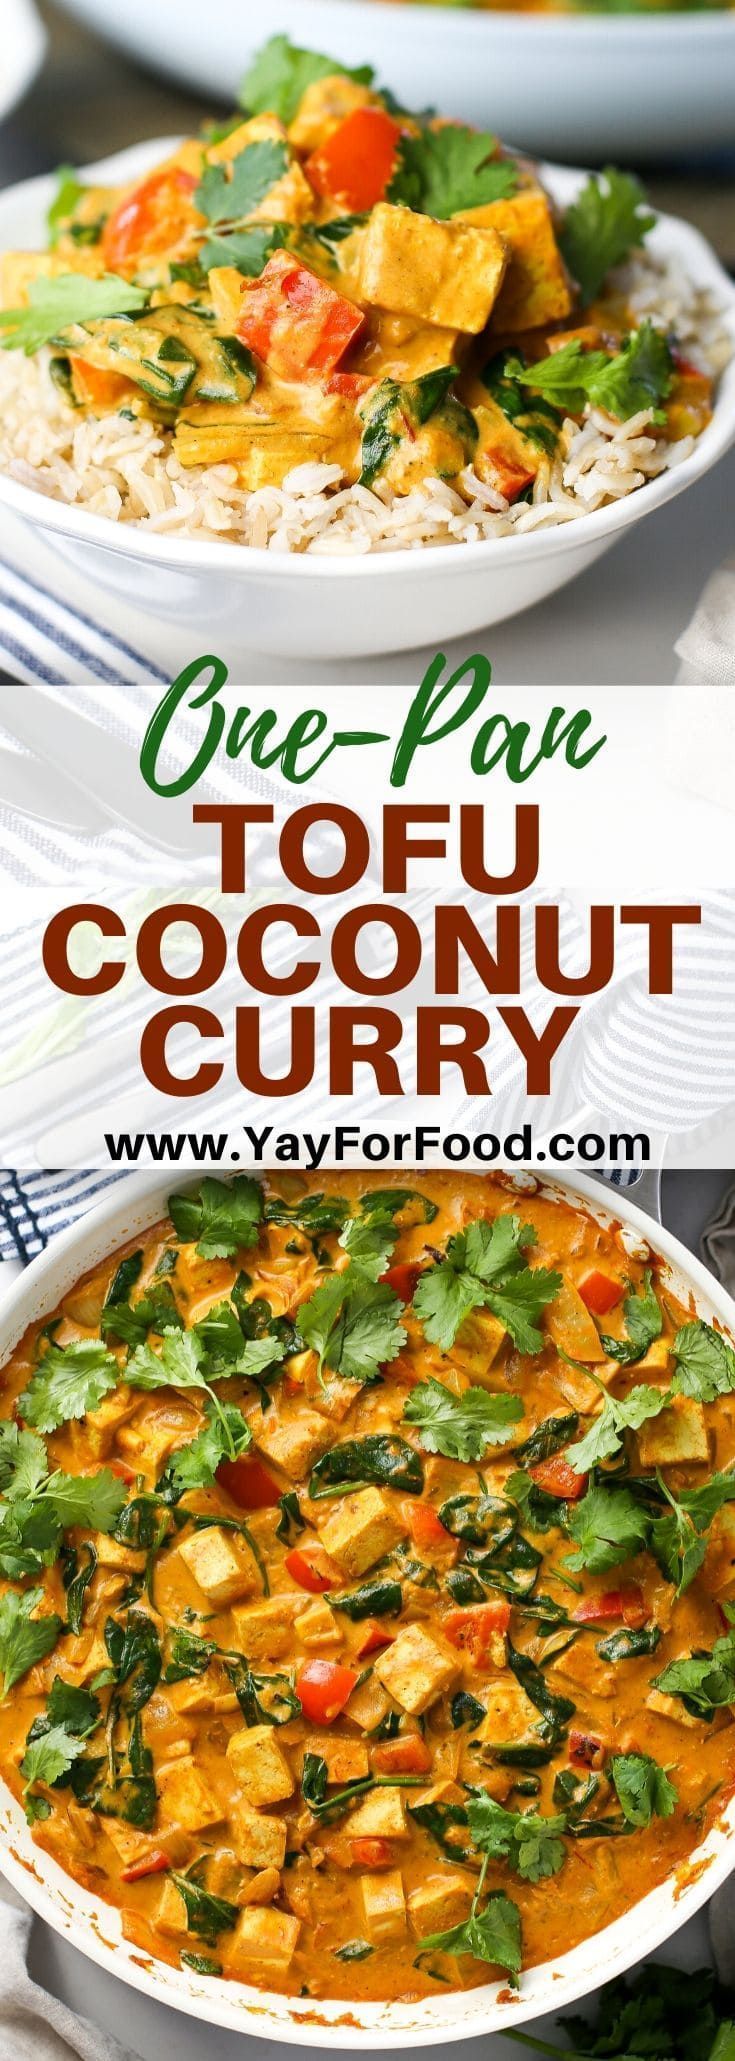 One-Pan Tofu Coconut Curry -   19 dinner recipes for family vegetarian ideas